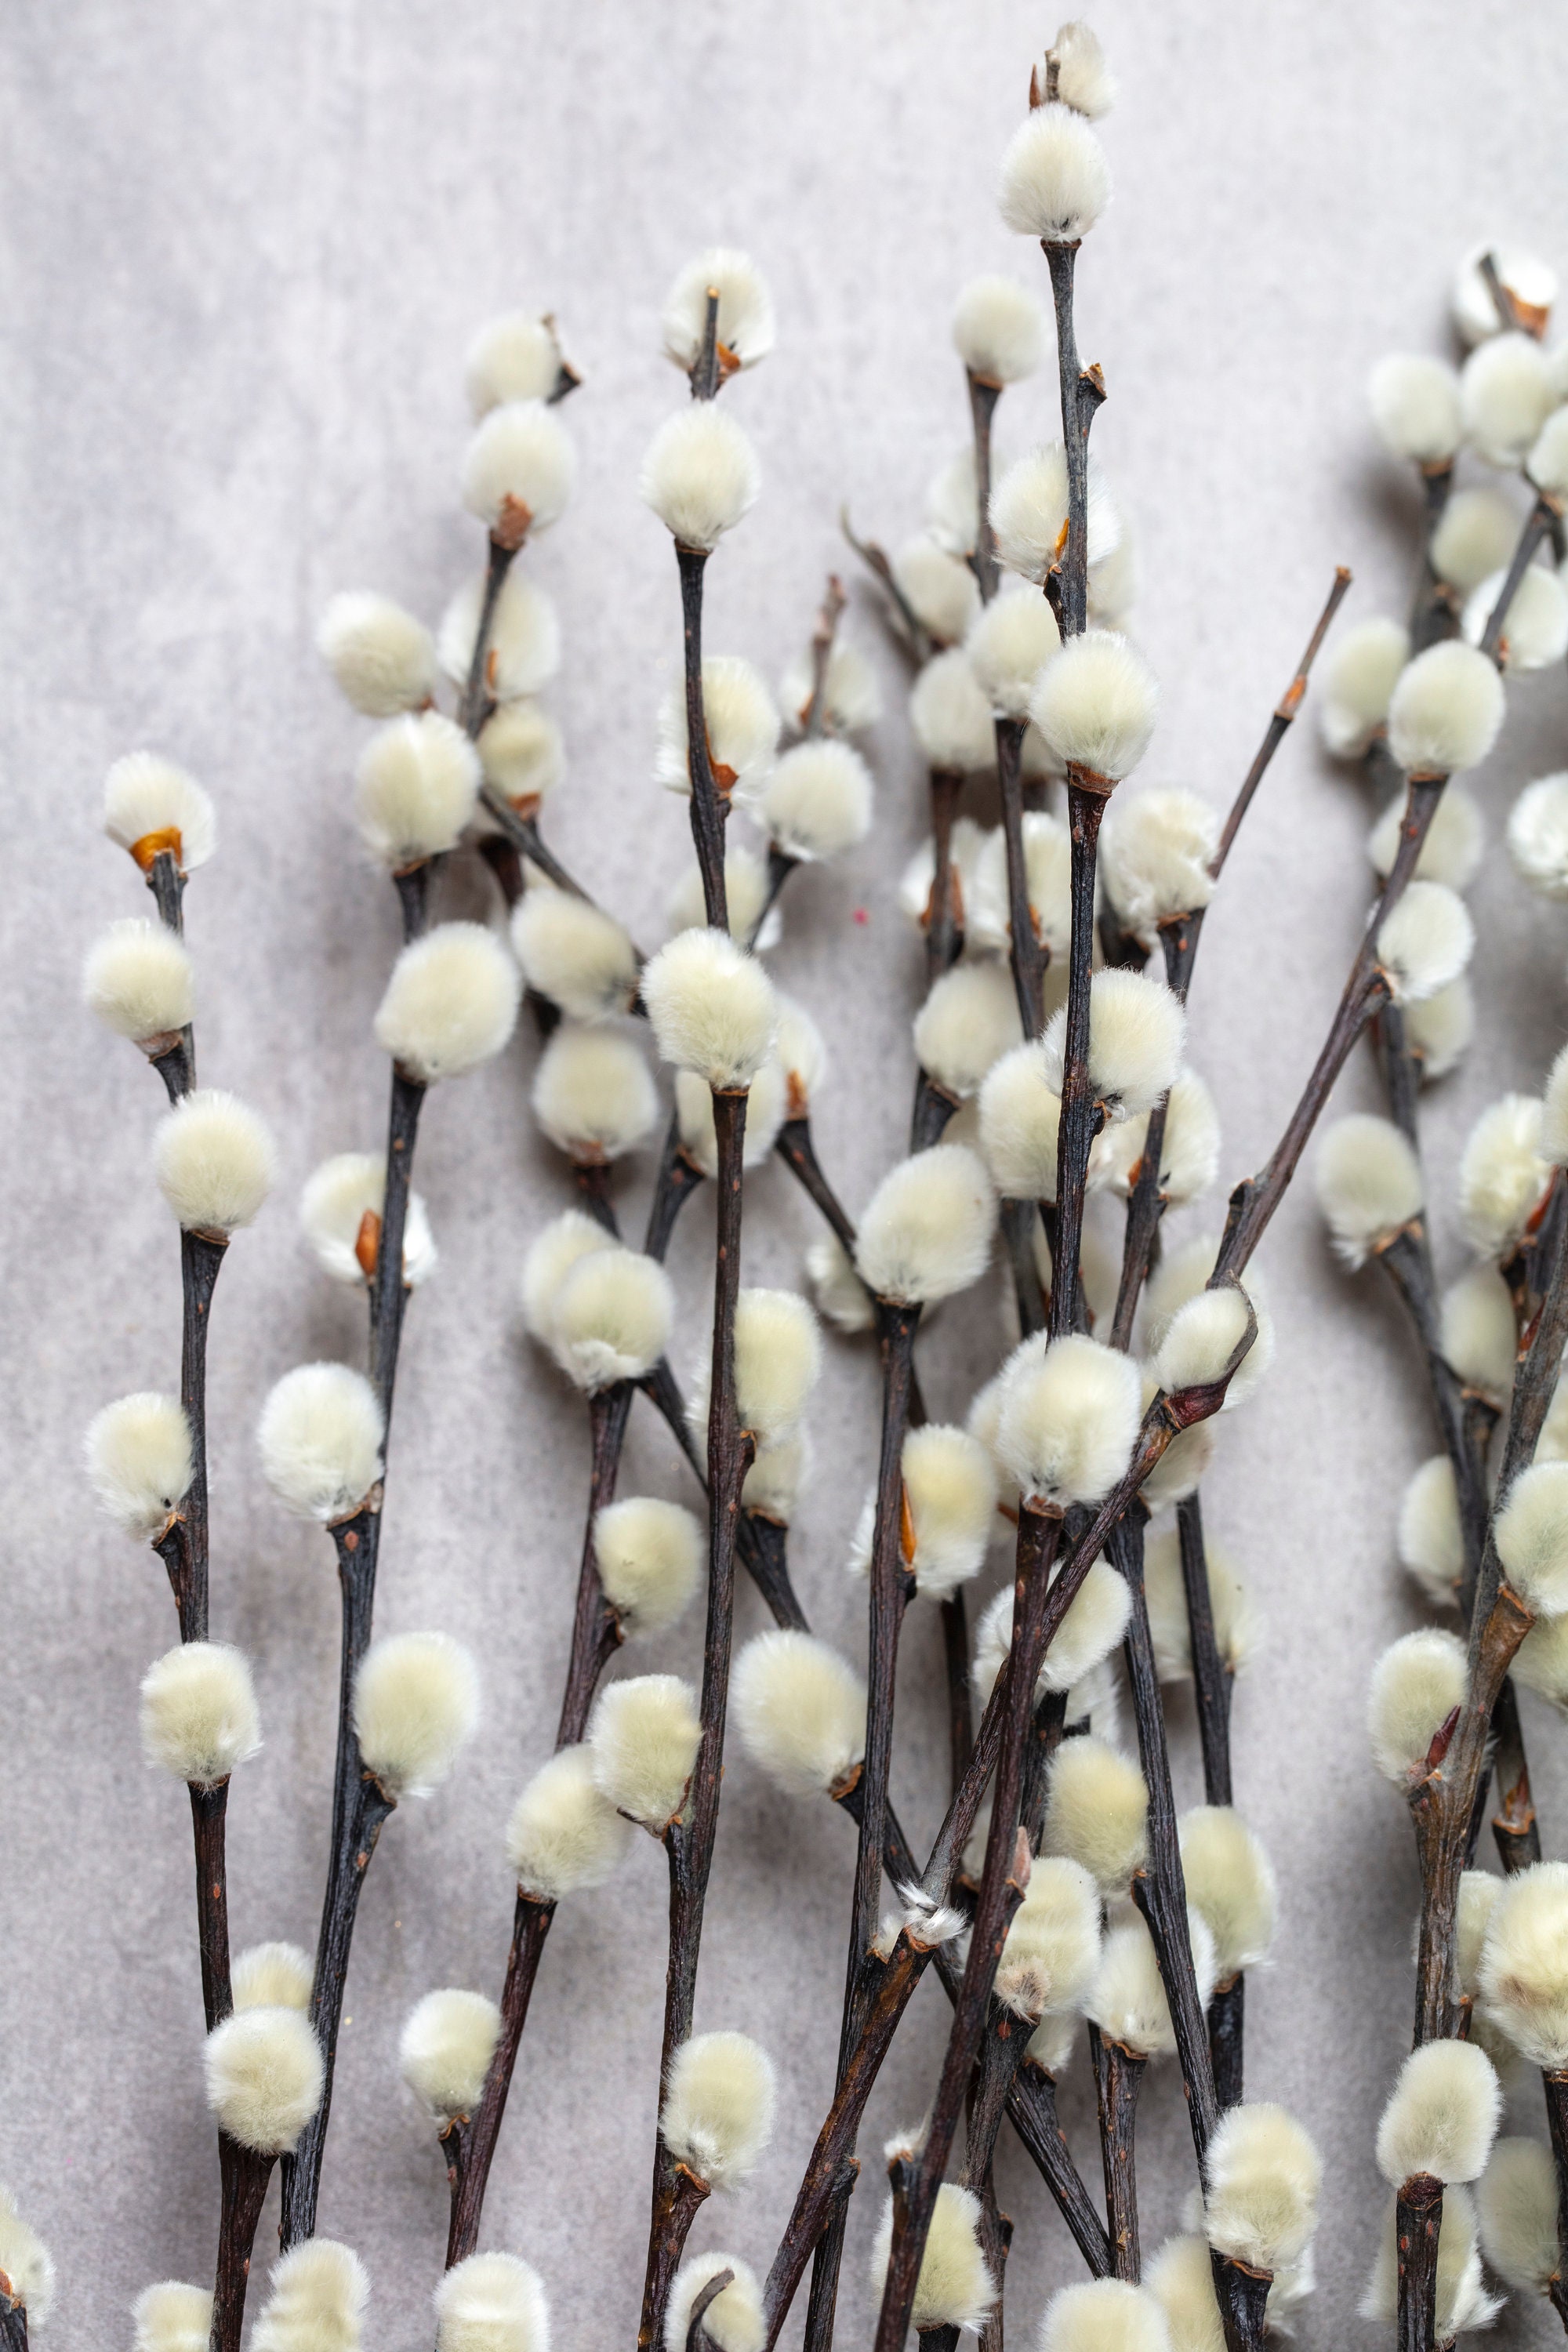 Pussy Willow Branches - 20 Stems Real Natural Dried Salix Branches